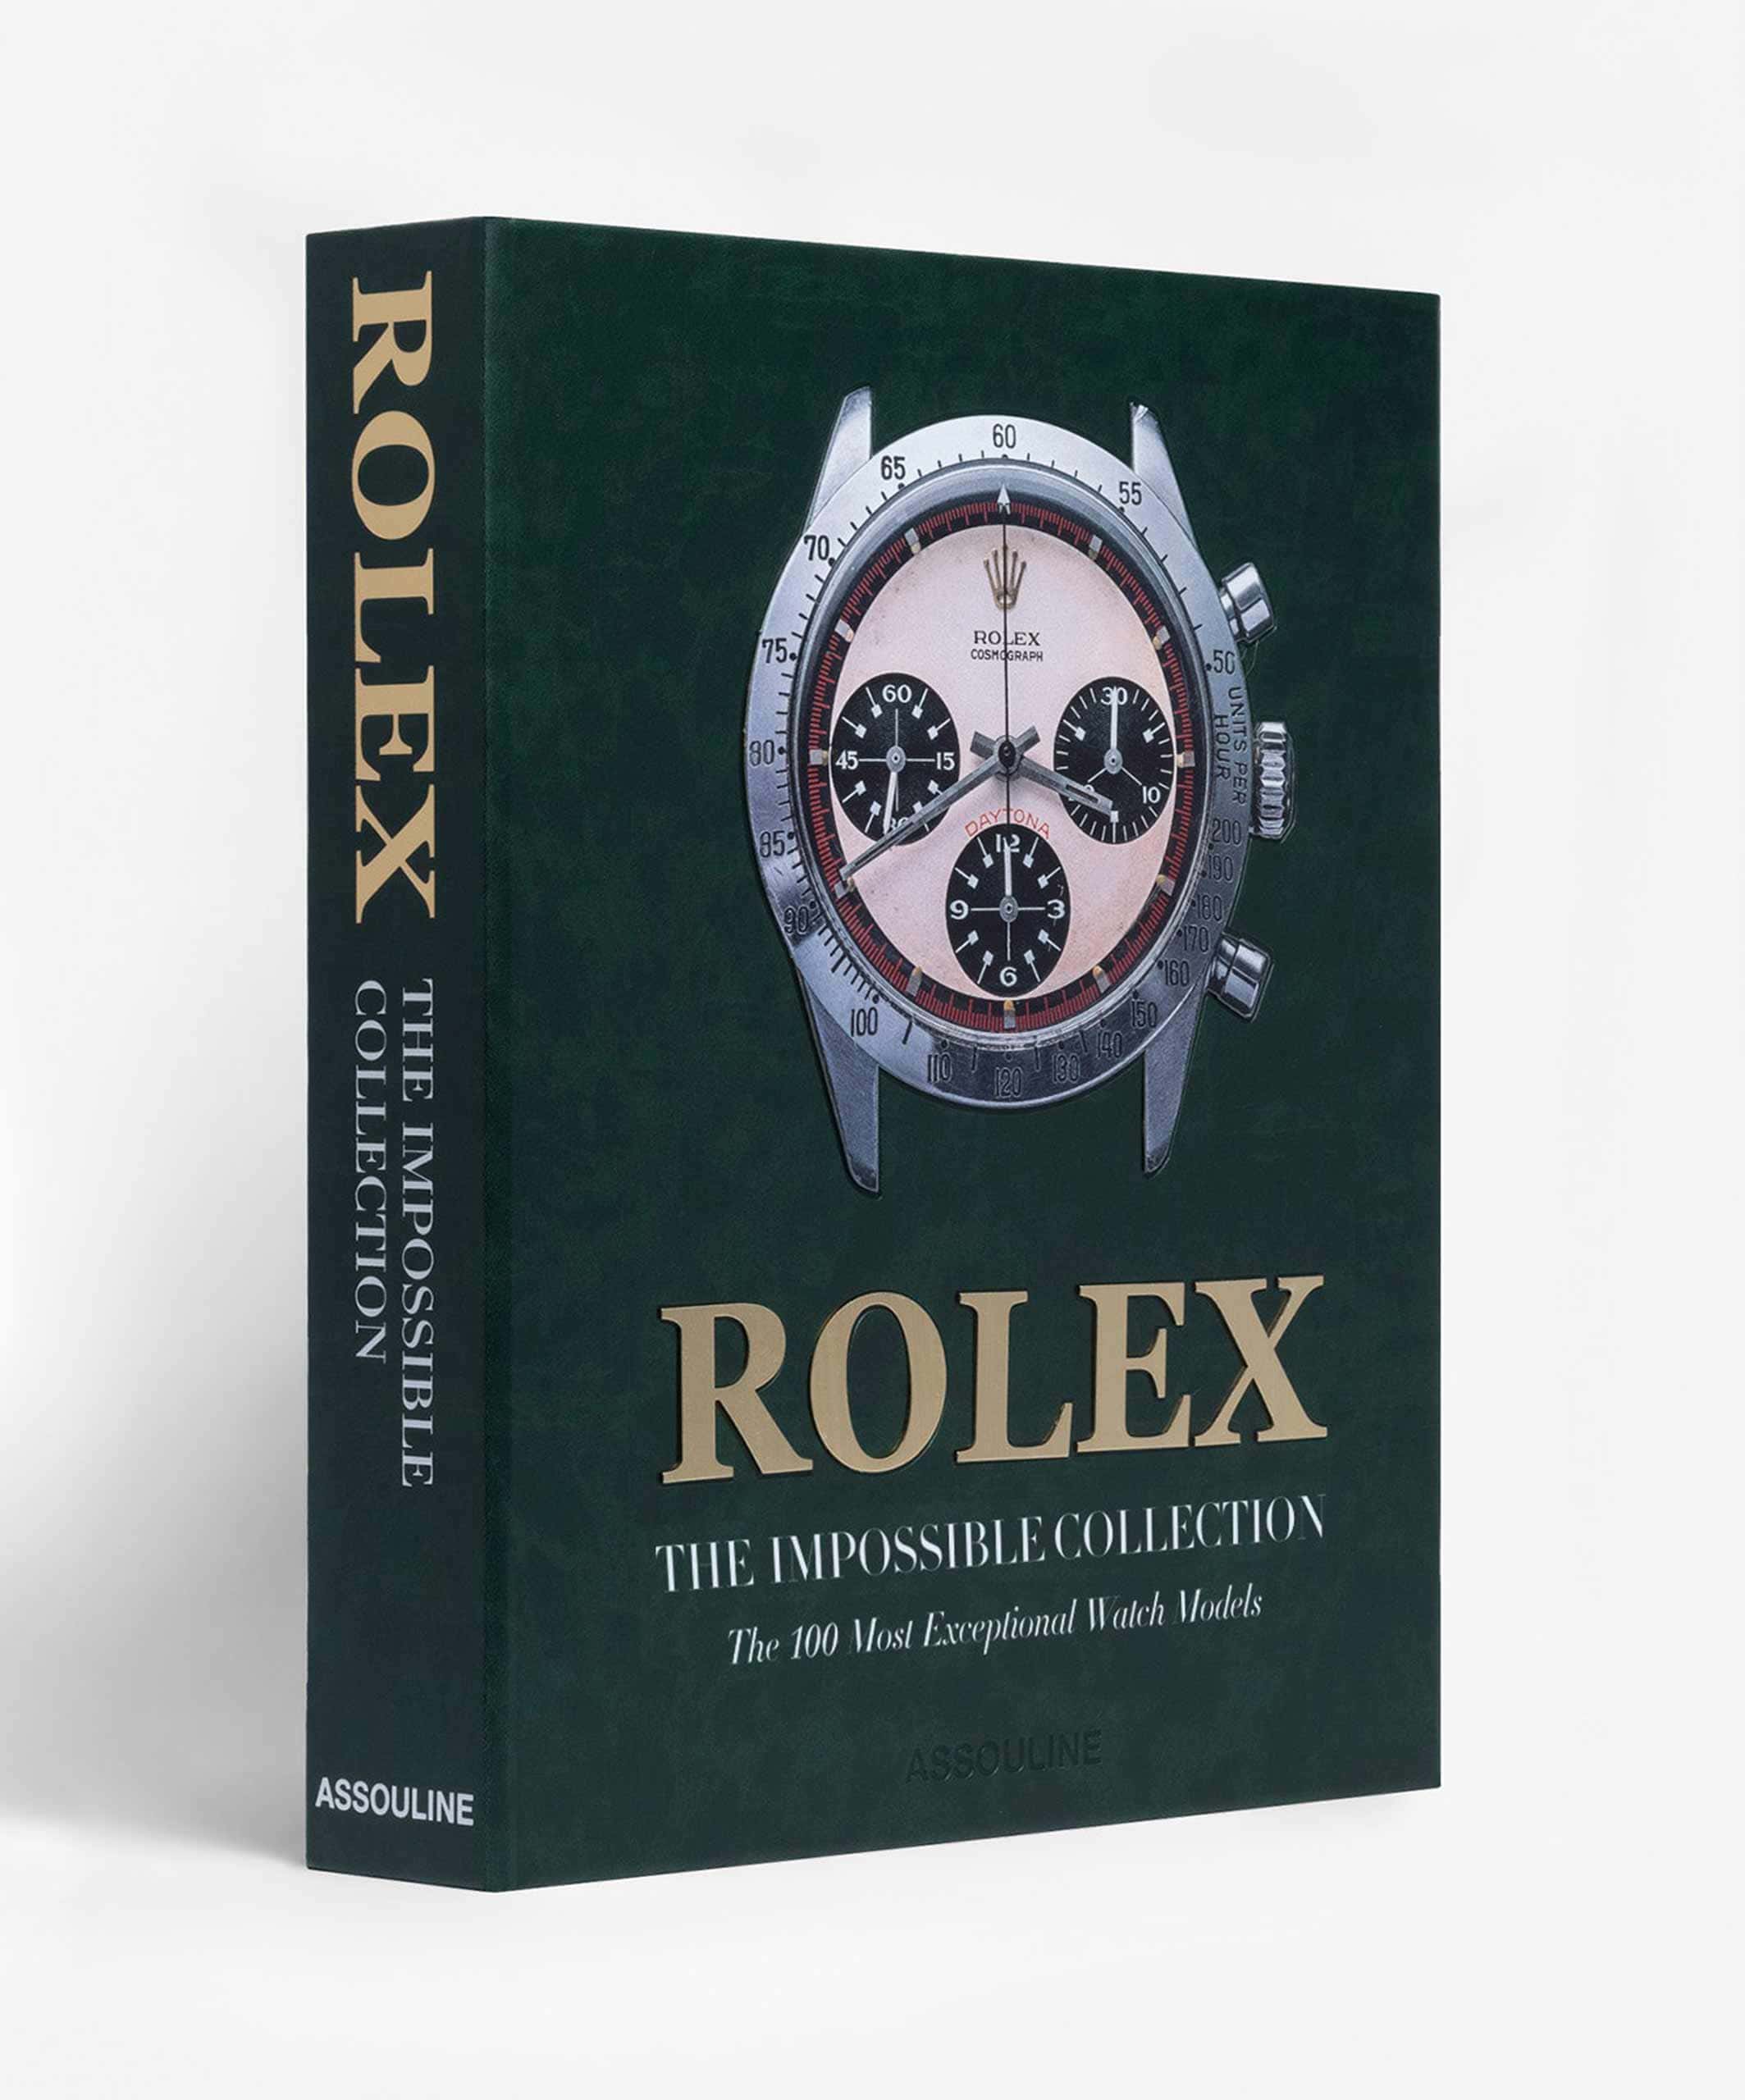 Assouline Updates their Massive Rolex Coffee Table Book